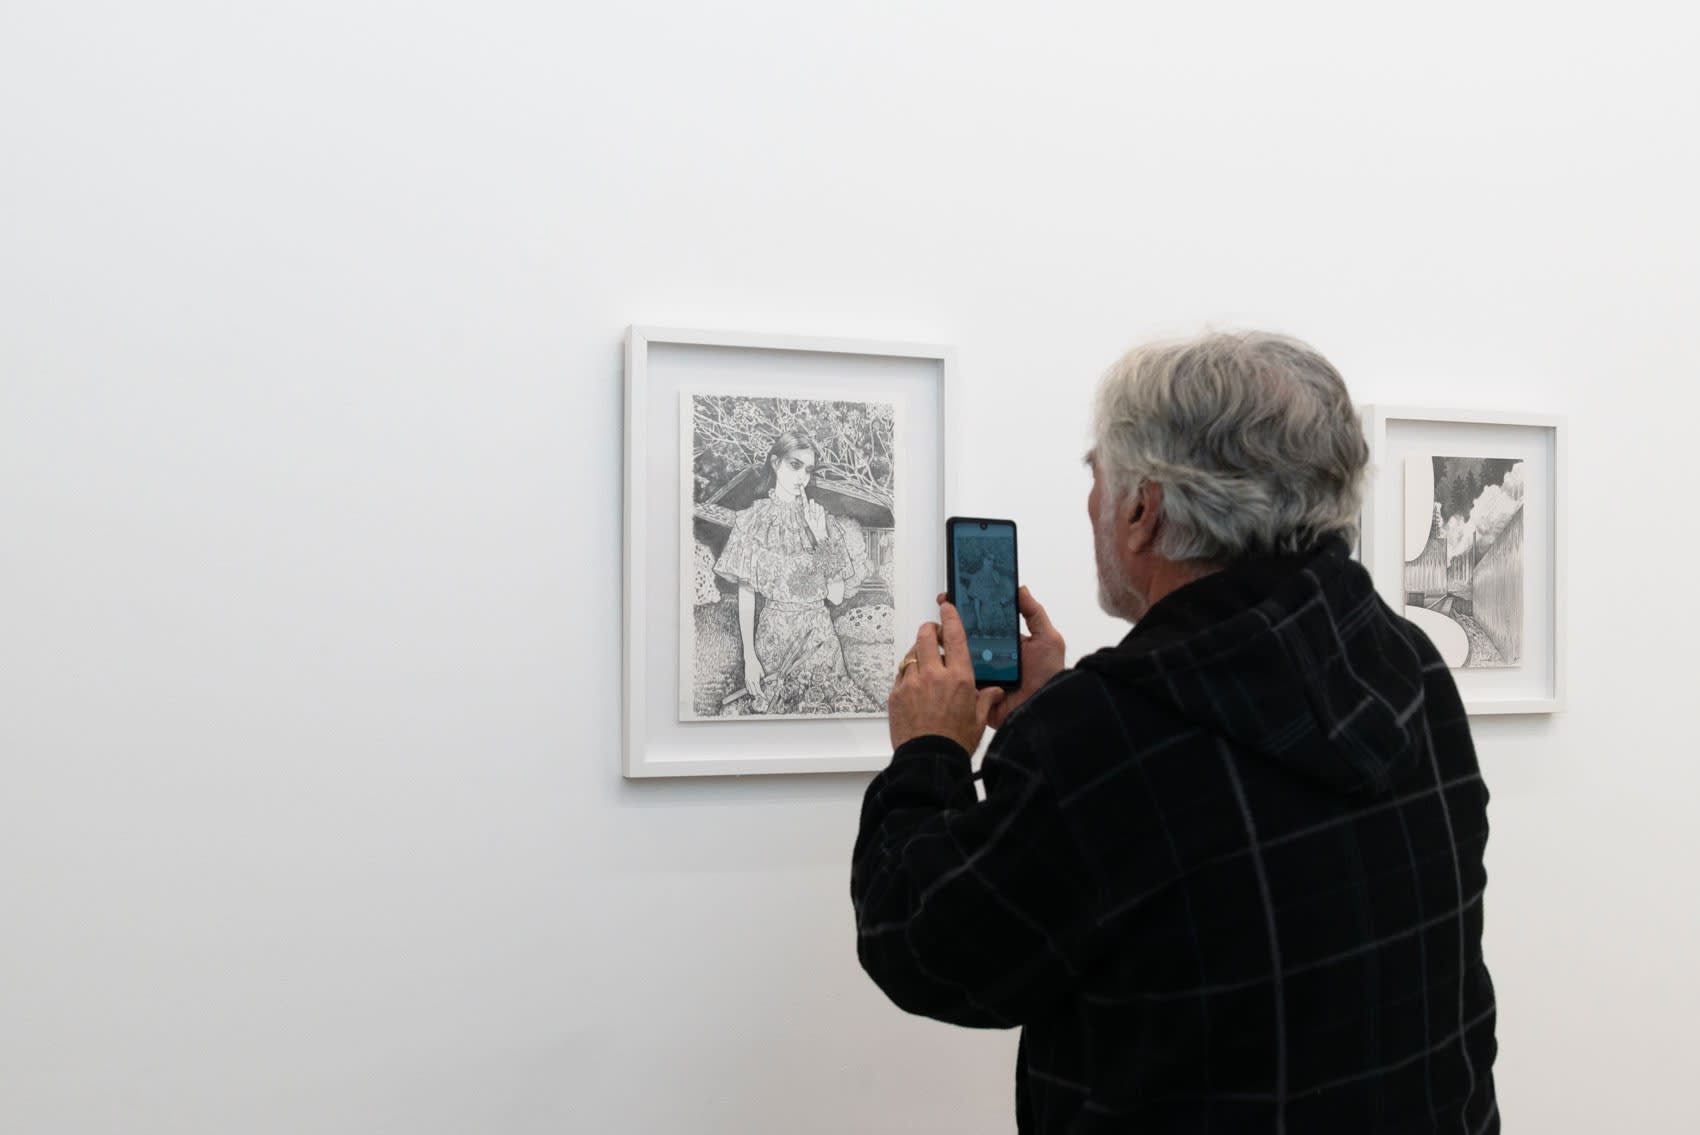 A man takes a photo of a black and white drawing on a white wall. The drawings are by the Dutch artist Martine Johanna, and depict young women doing various stereotypical activities (gardening, crying, etc.)